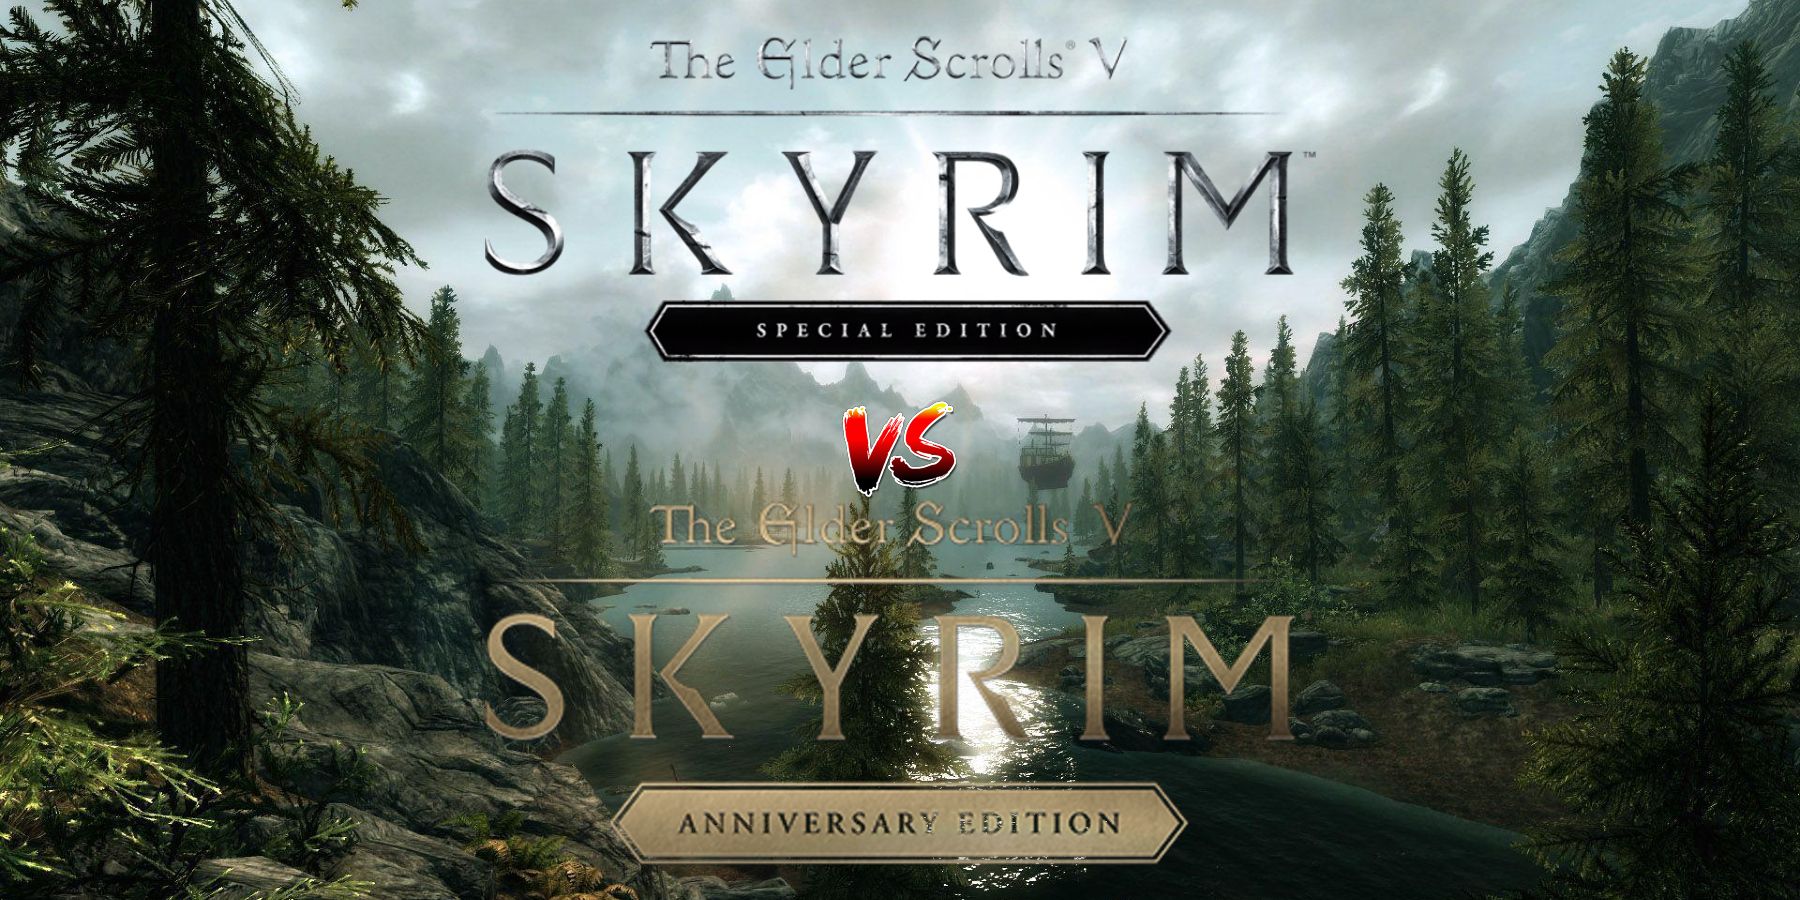 hård Rationalisering transmission Skyrim: Differences Between Special Edition vs. Anniversary Edition  Explained